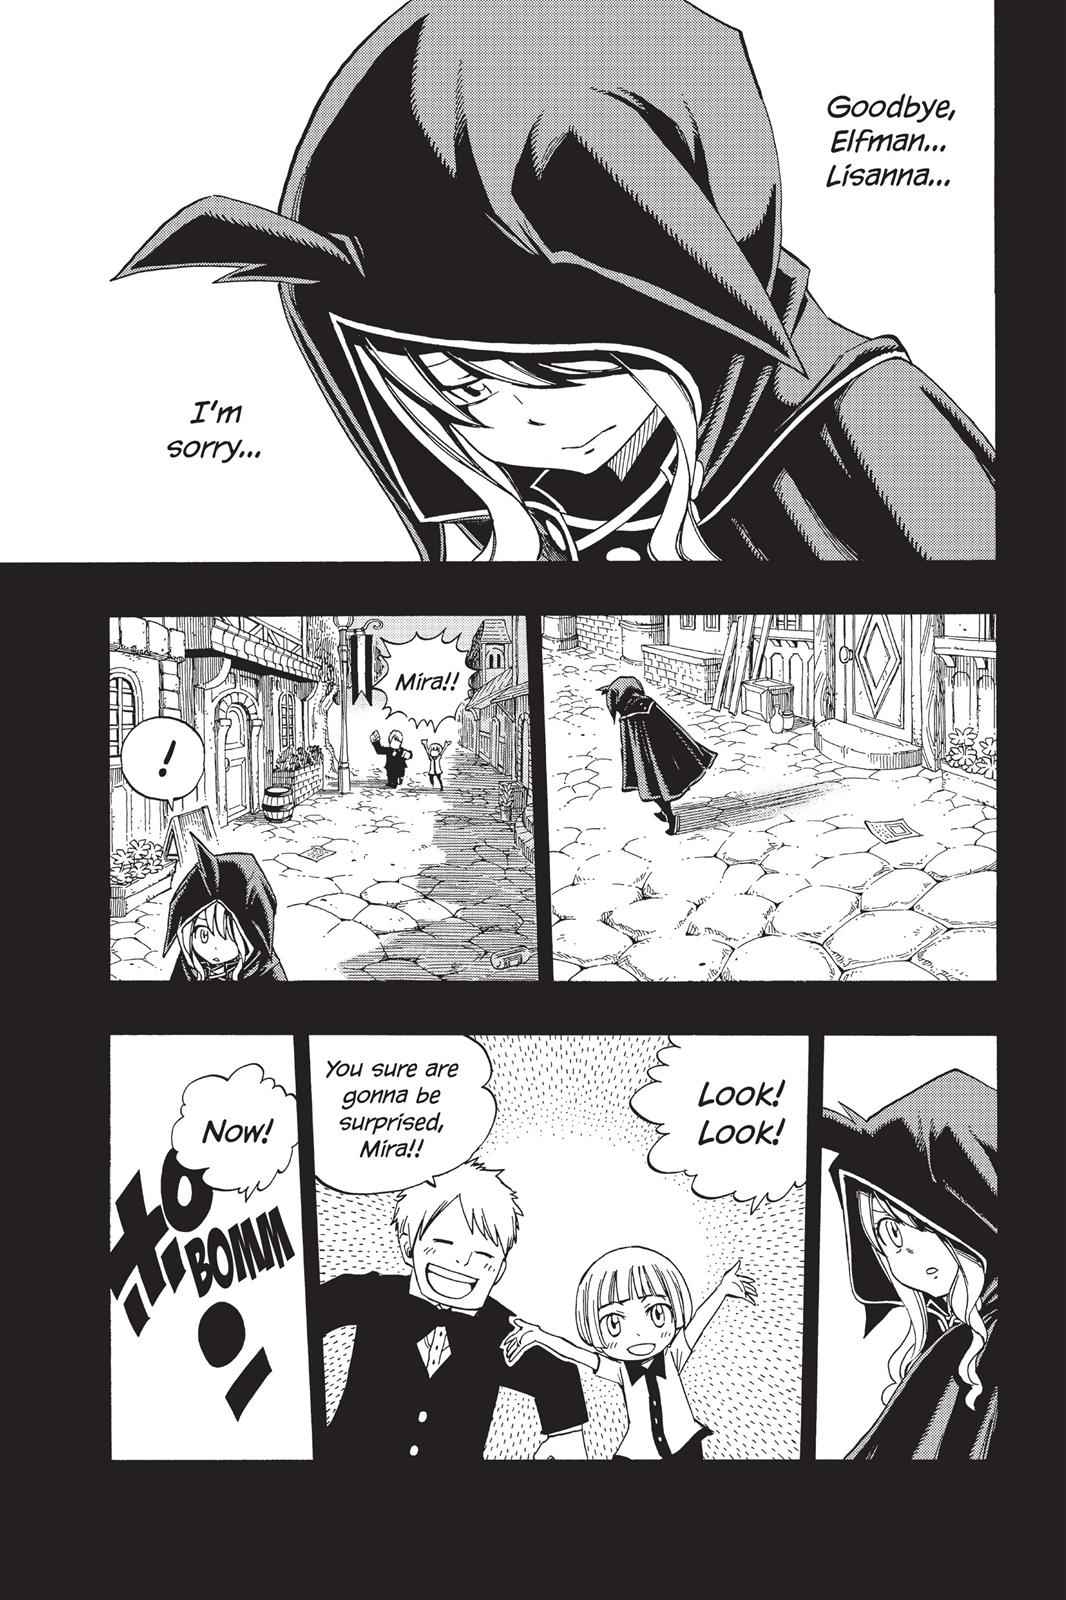  Chapter 381 image 011